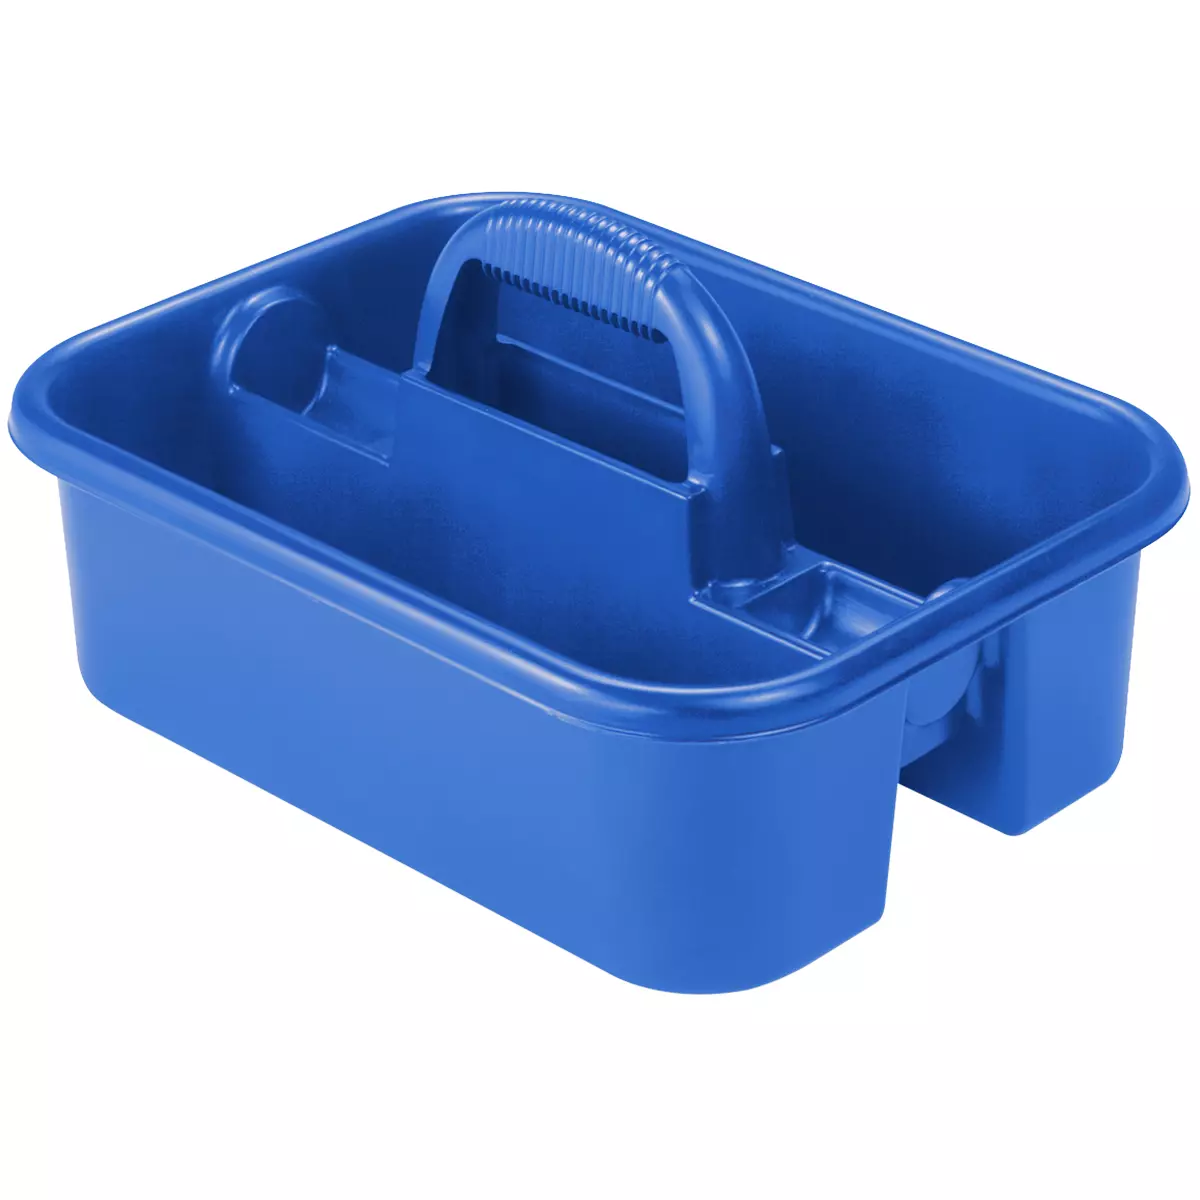 KeFanta Cleaning Supplies Caddy 2 Pack Cleaning Supply Organizer with Handle Plastic Bucket for Cleaning Products Tool Storage Caddy Blue